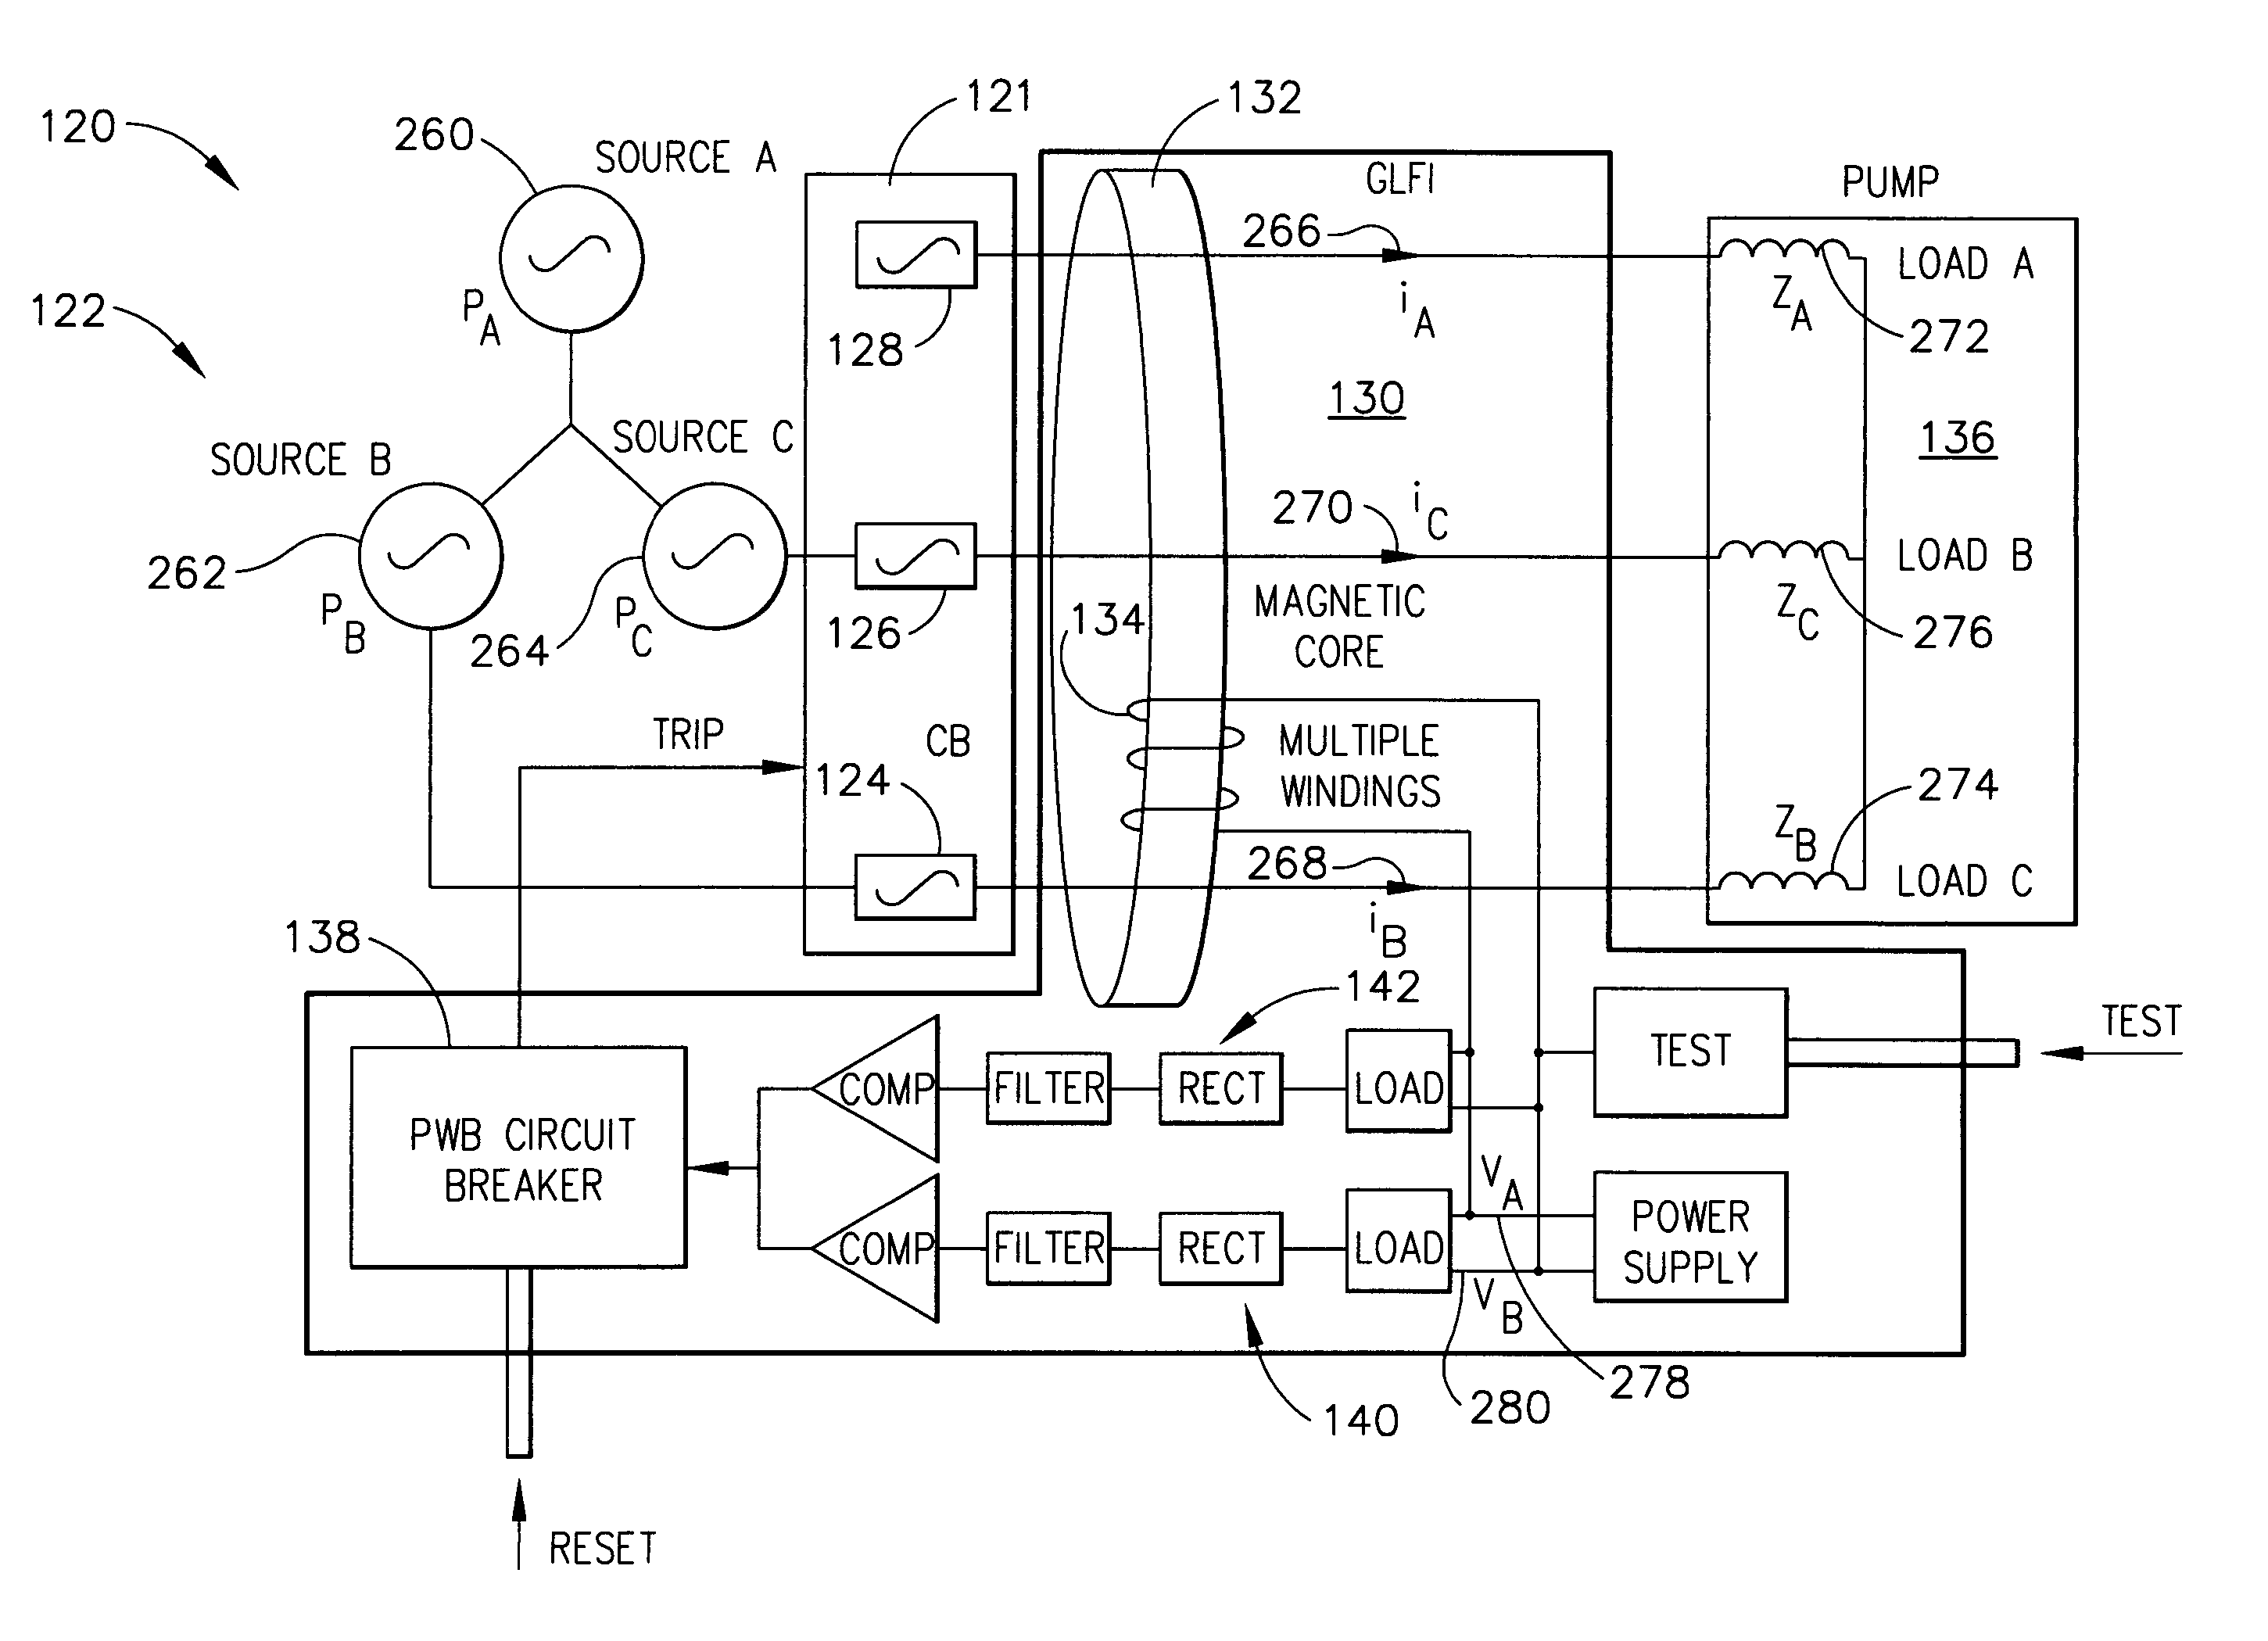 Ground and line fault interrupt controller/adapter